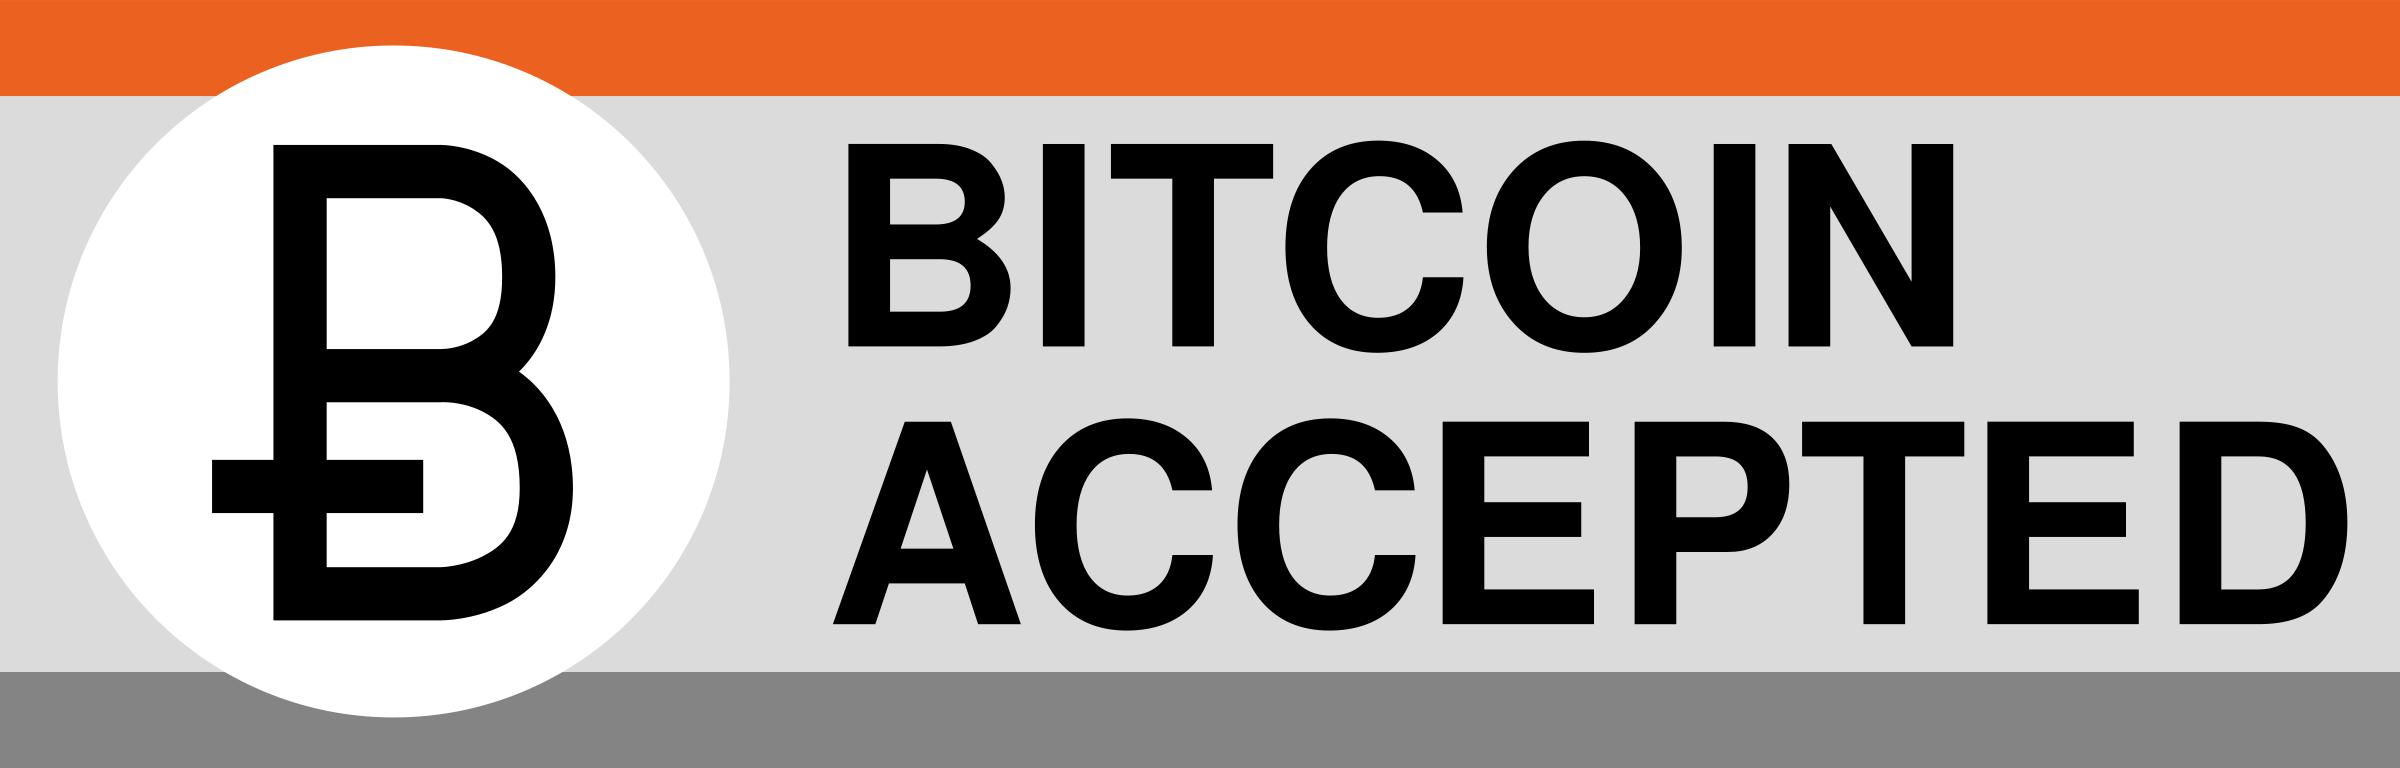 bannerBitcoinAccepted png